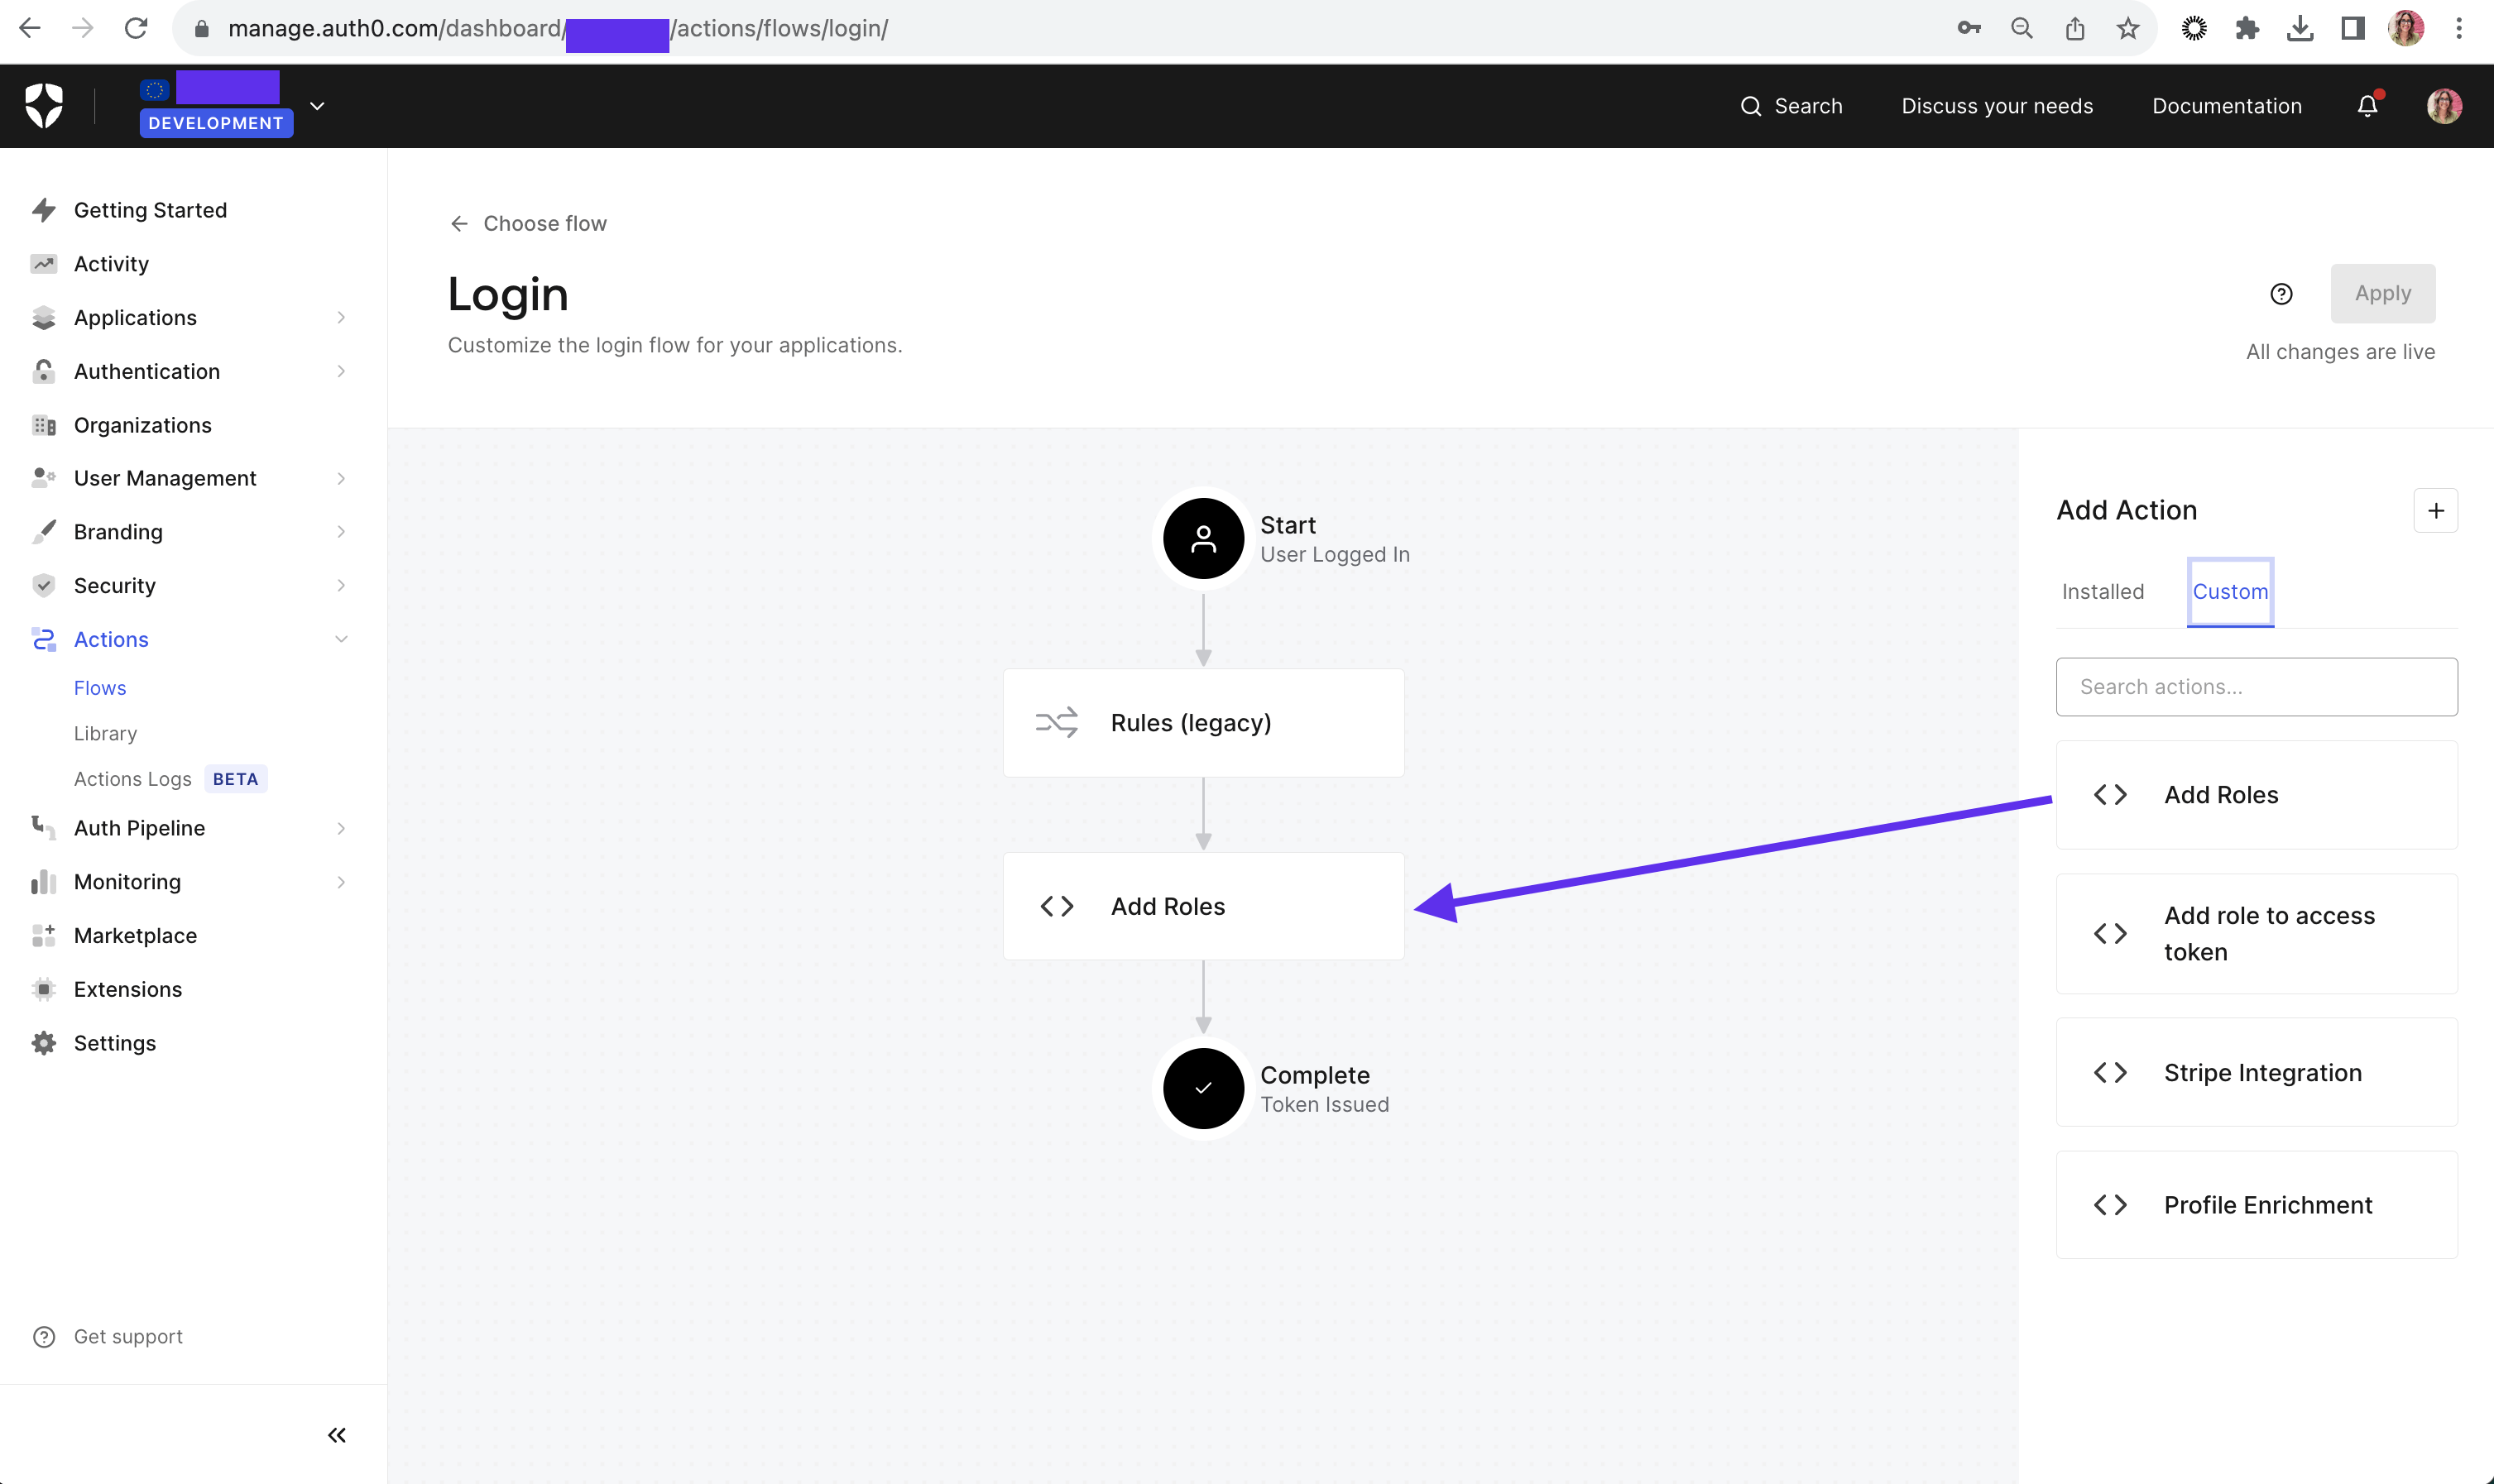 Login Flow - drag and drop role action